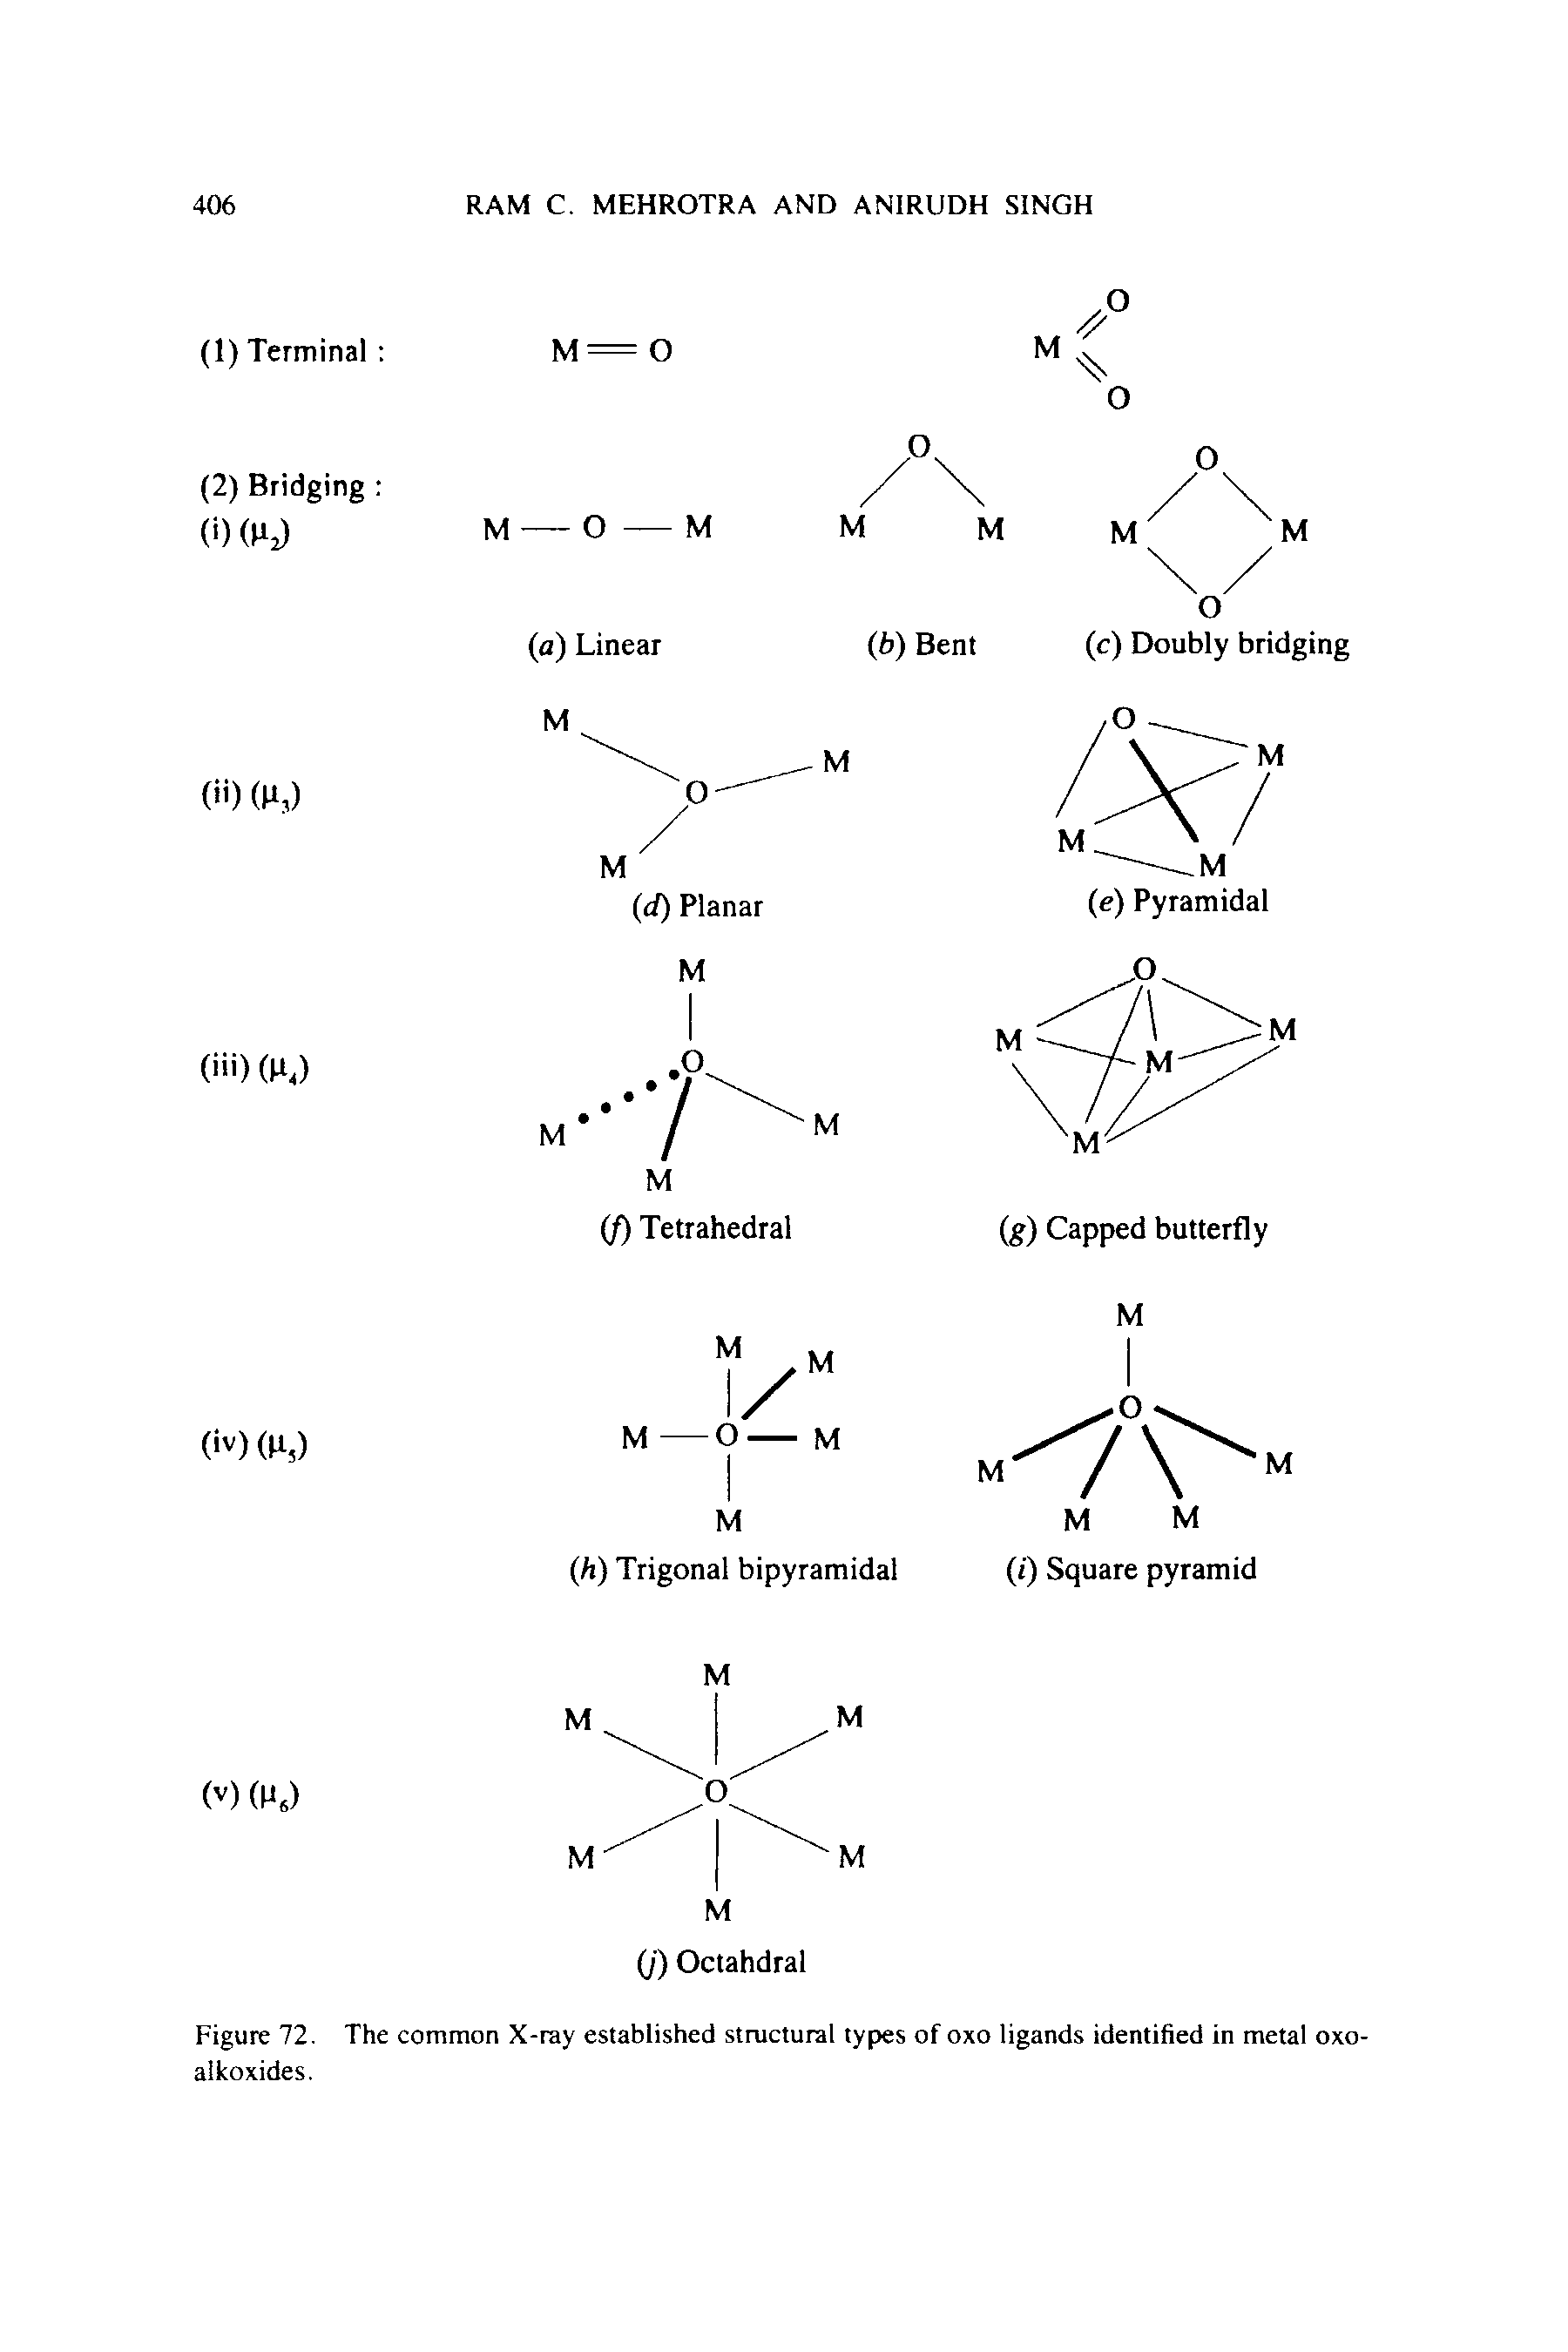 Figure 72. The common X-ray established structural types of oxo ligands identified in metal oxo-alkoxides.